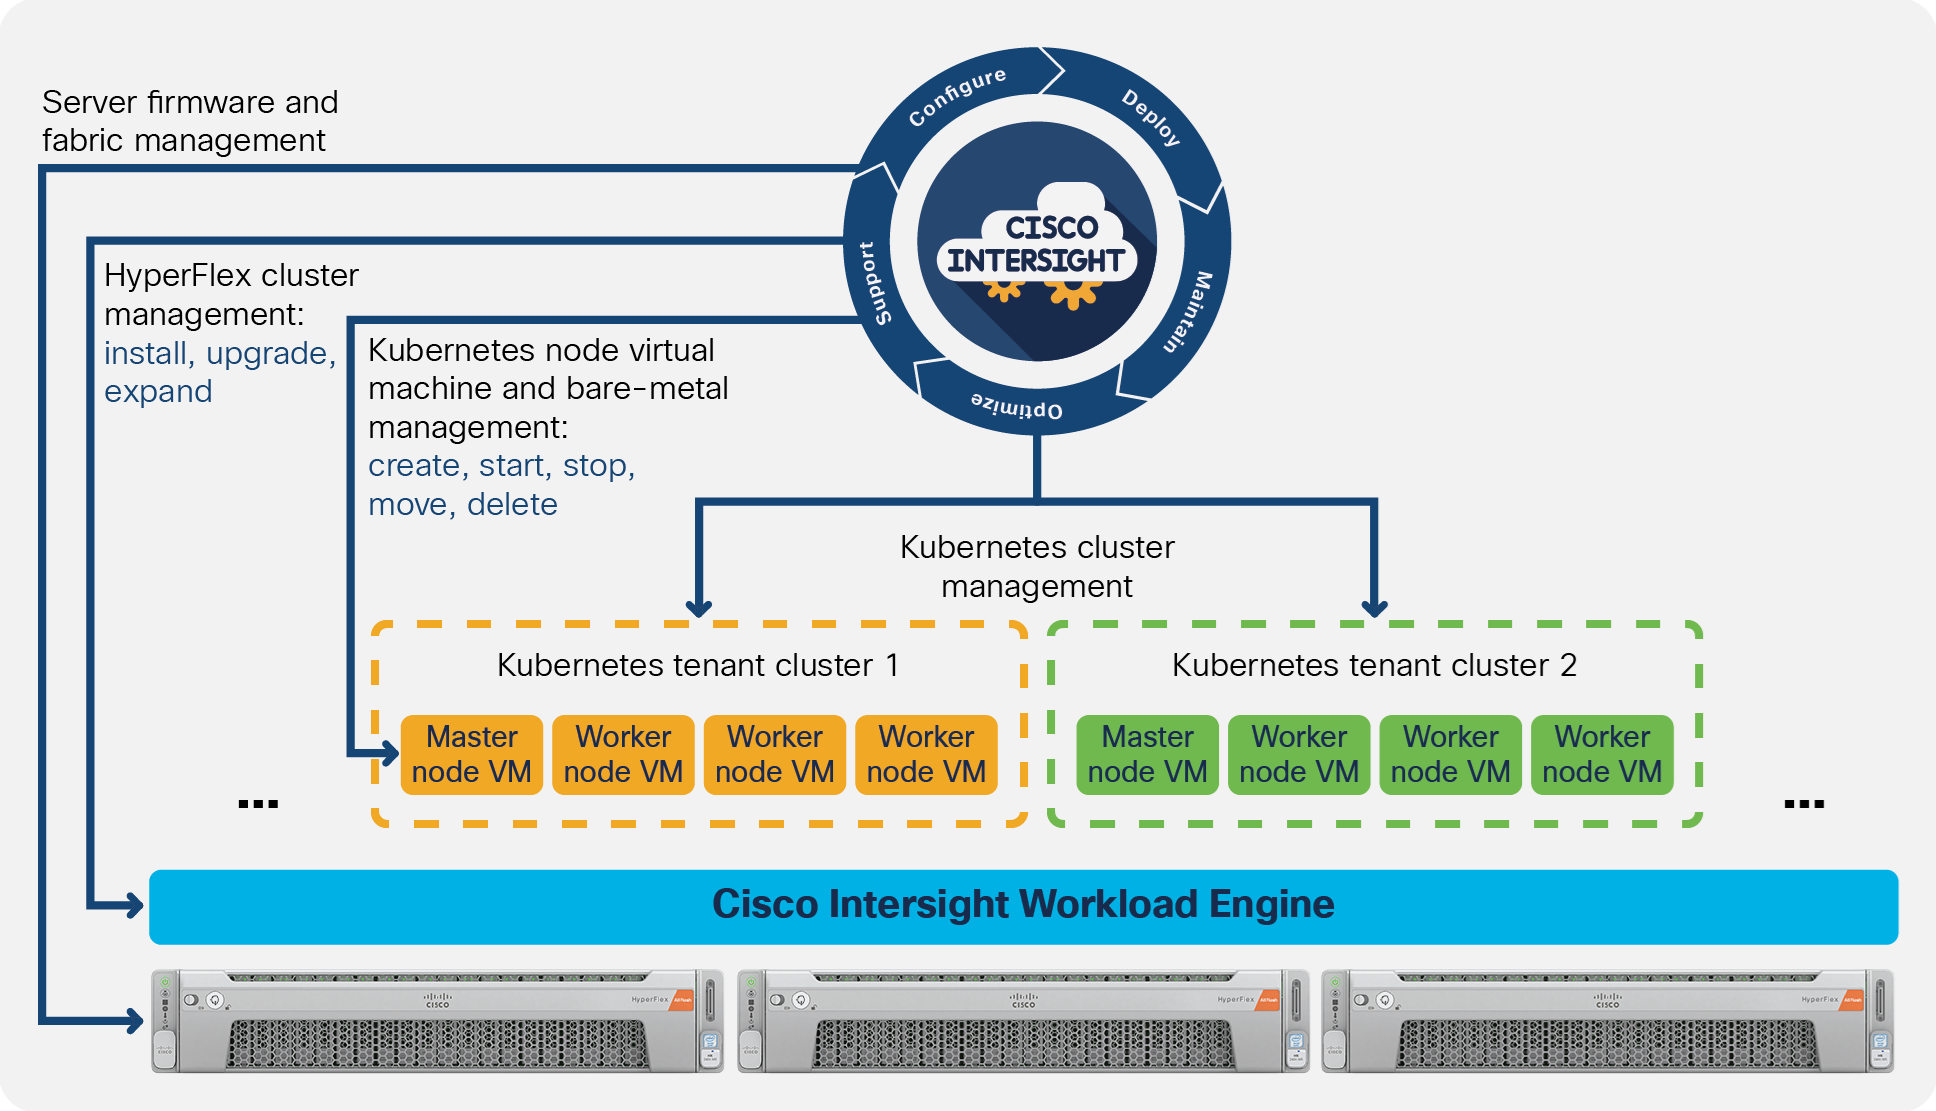 The Cisco Intersight platform manages the entire stack from physical servers to the Kubernetes environment